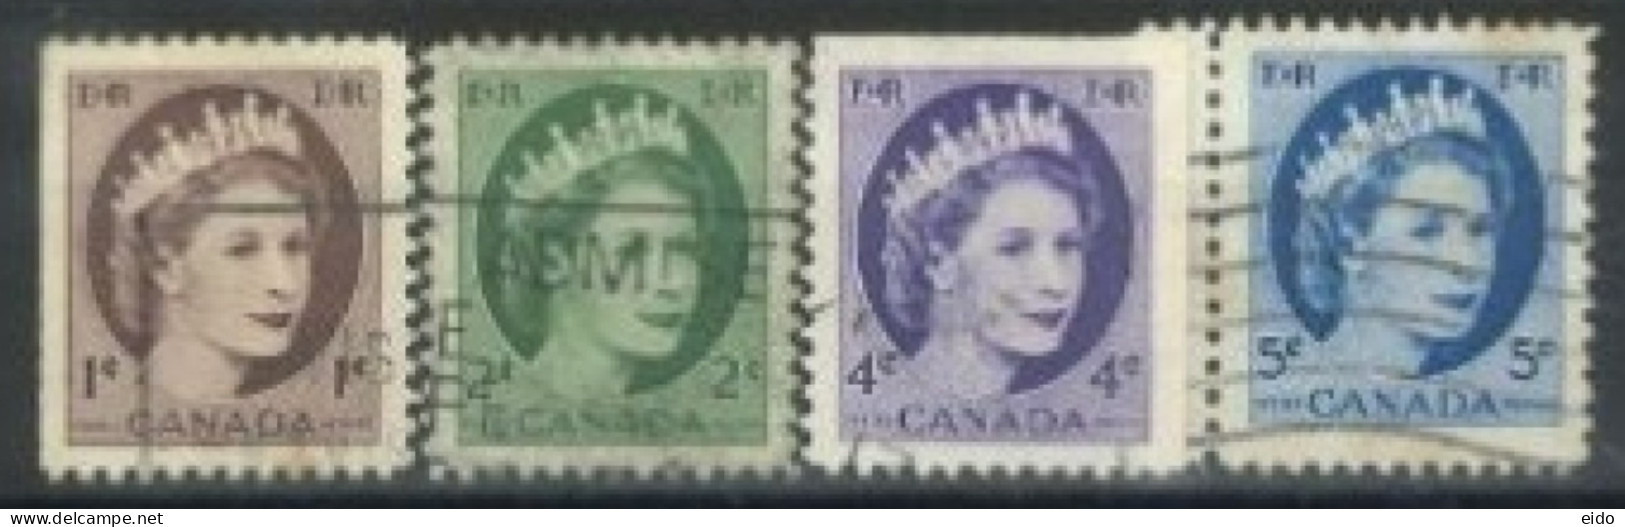 CANADA - 1954, QUEEN ELIZABETH II STAMPS SET OF 4, USED. - Used Stamps